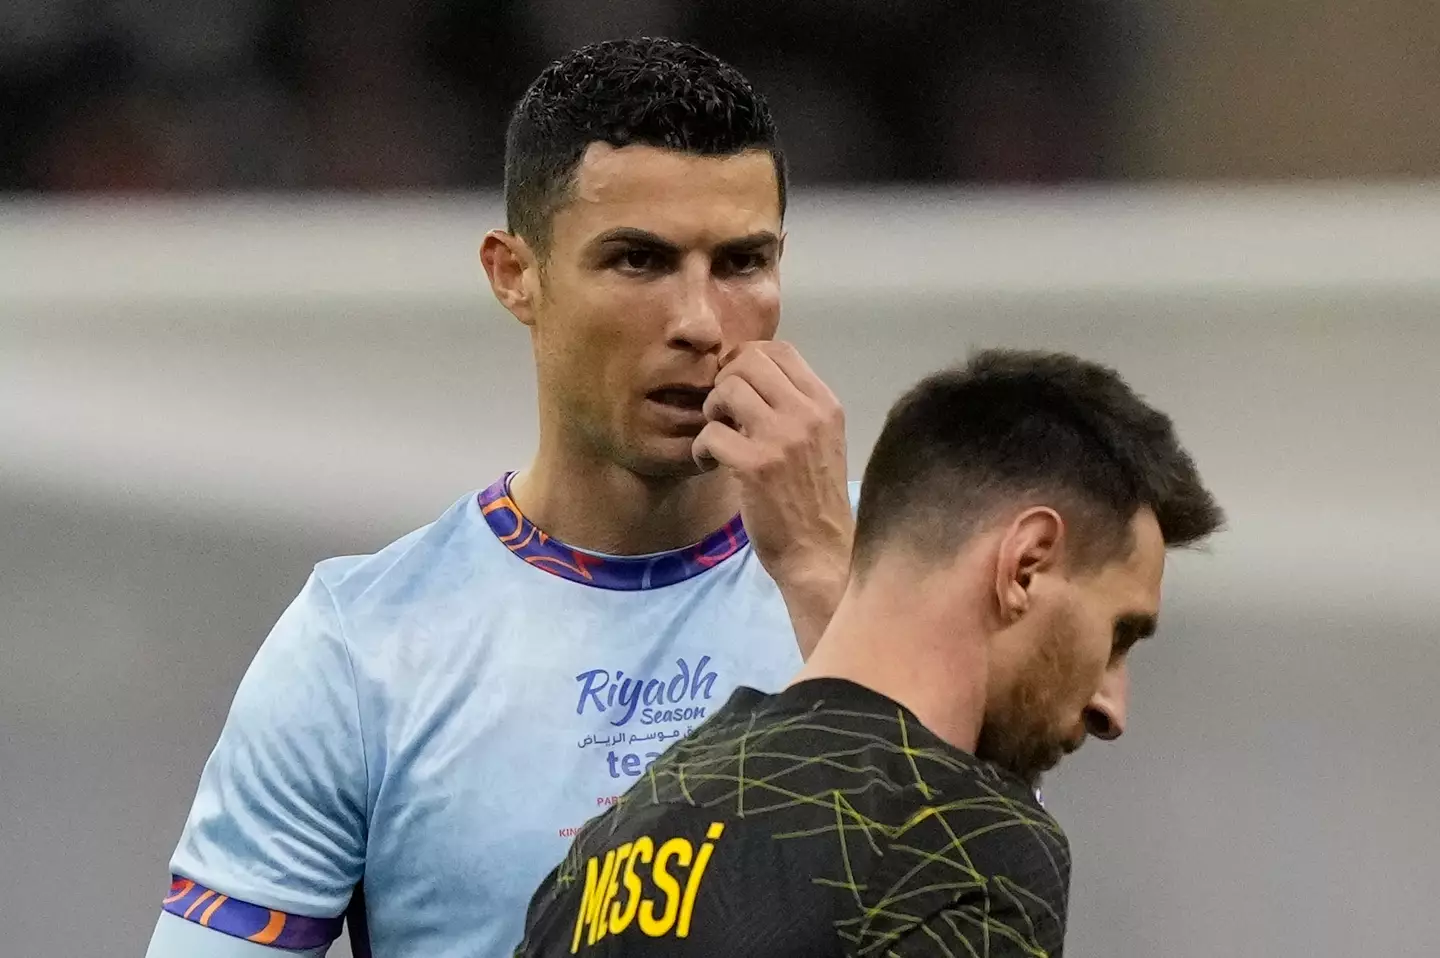 Cristiano Ronaldo and his old foe Lionel Messi were reunited on Thursday evening. (